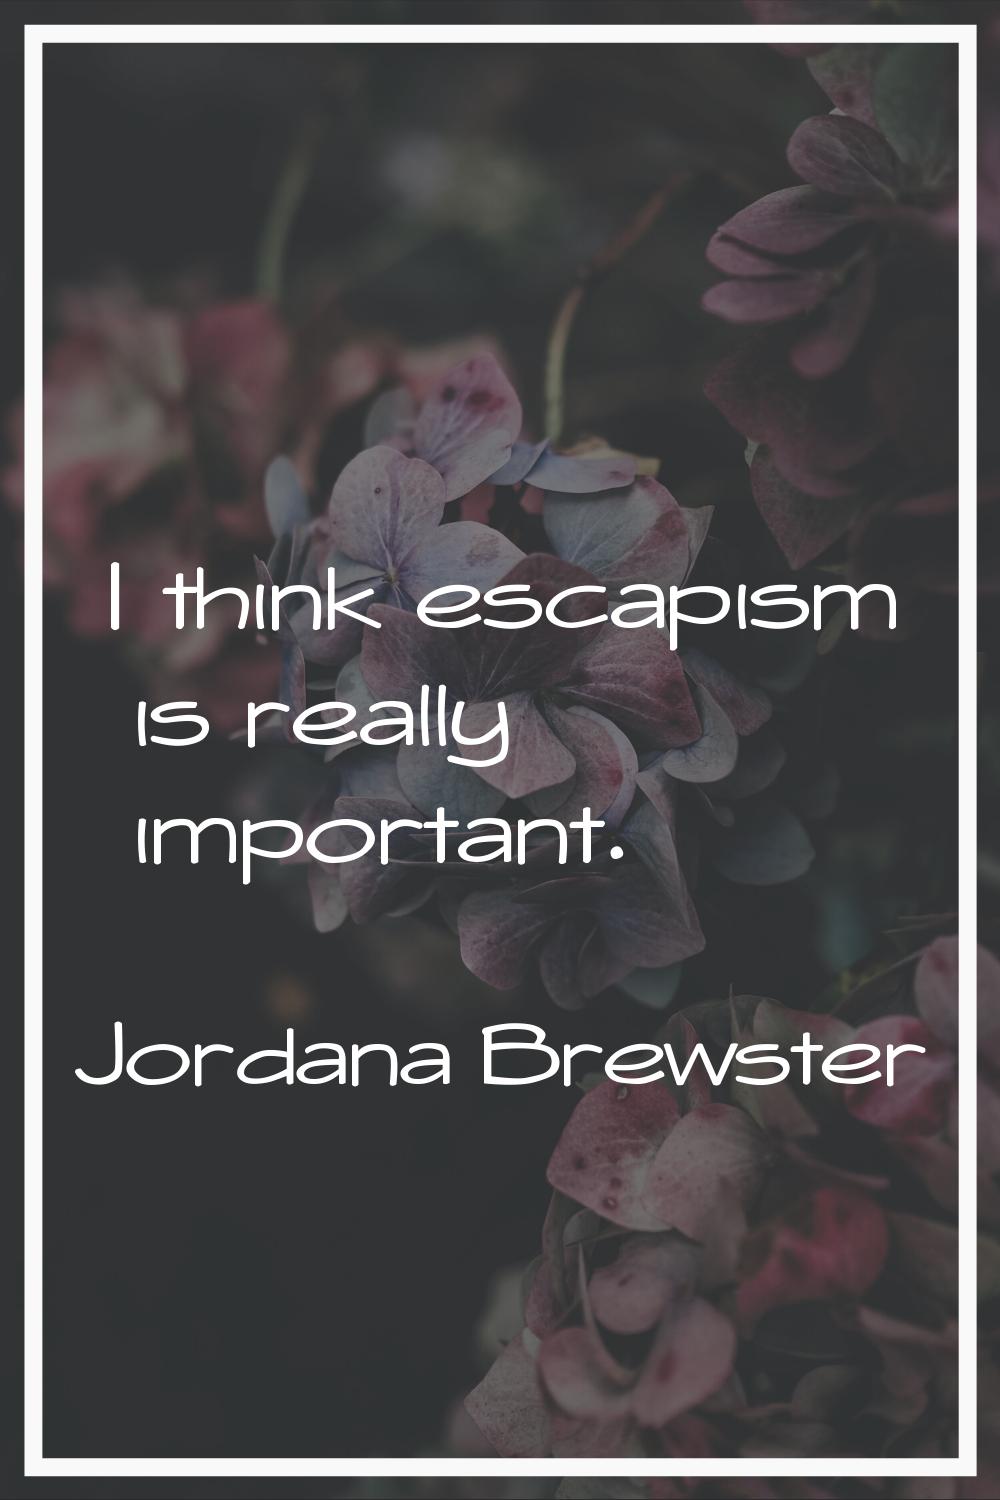 I think escapism is really important.